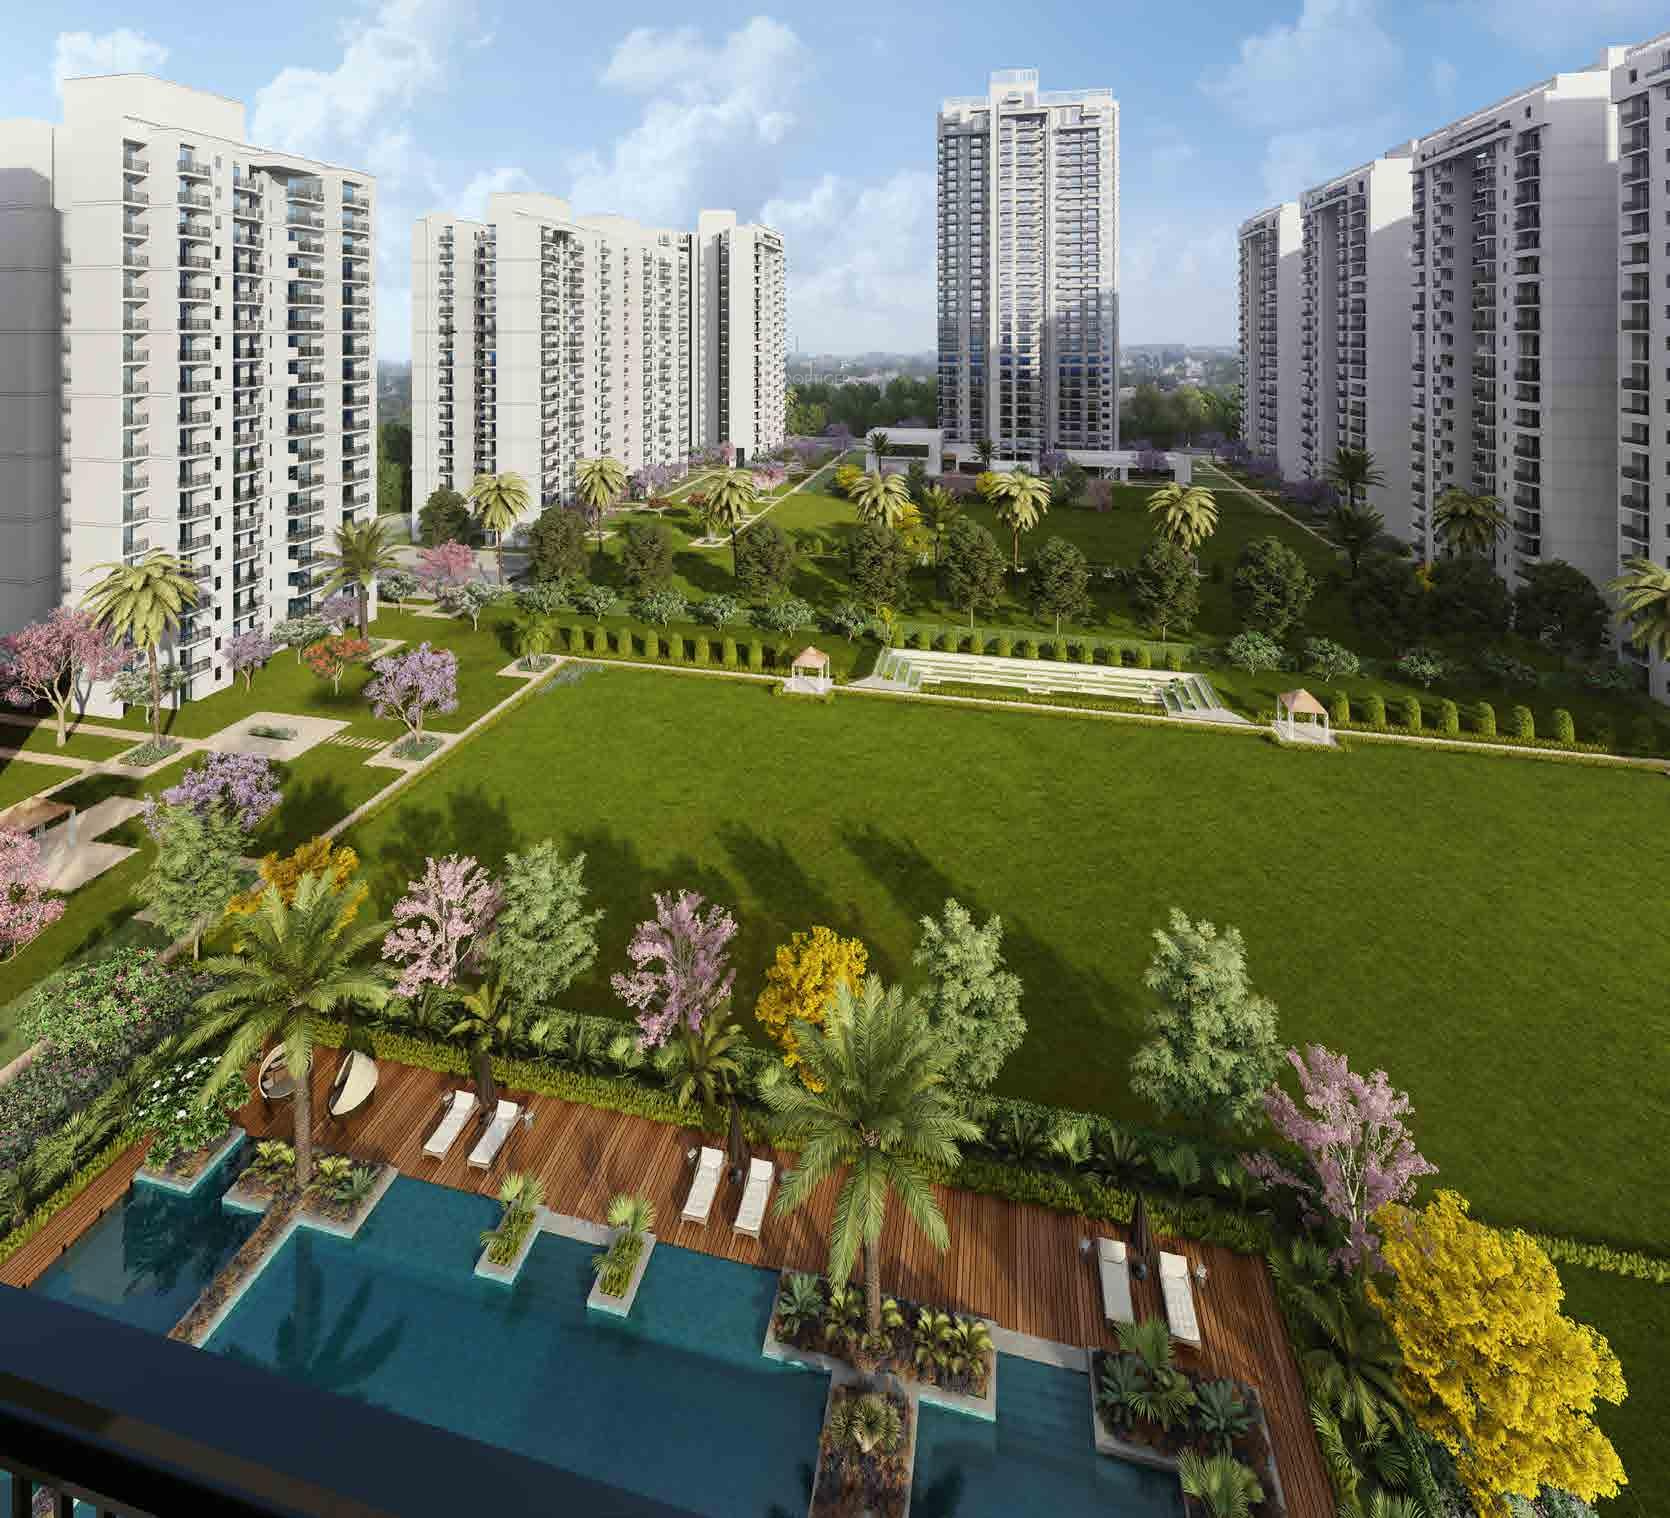 3 Bedroom Apartment area 1800 sq ft for sale in Godrej tropical isle Noida 